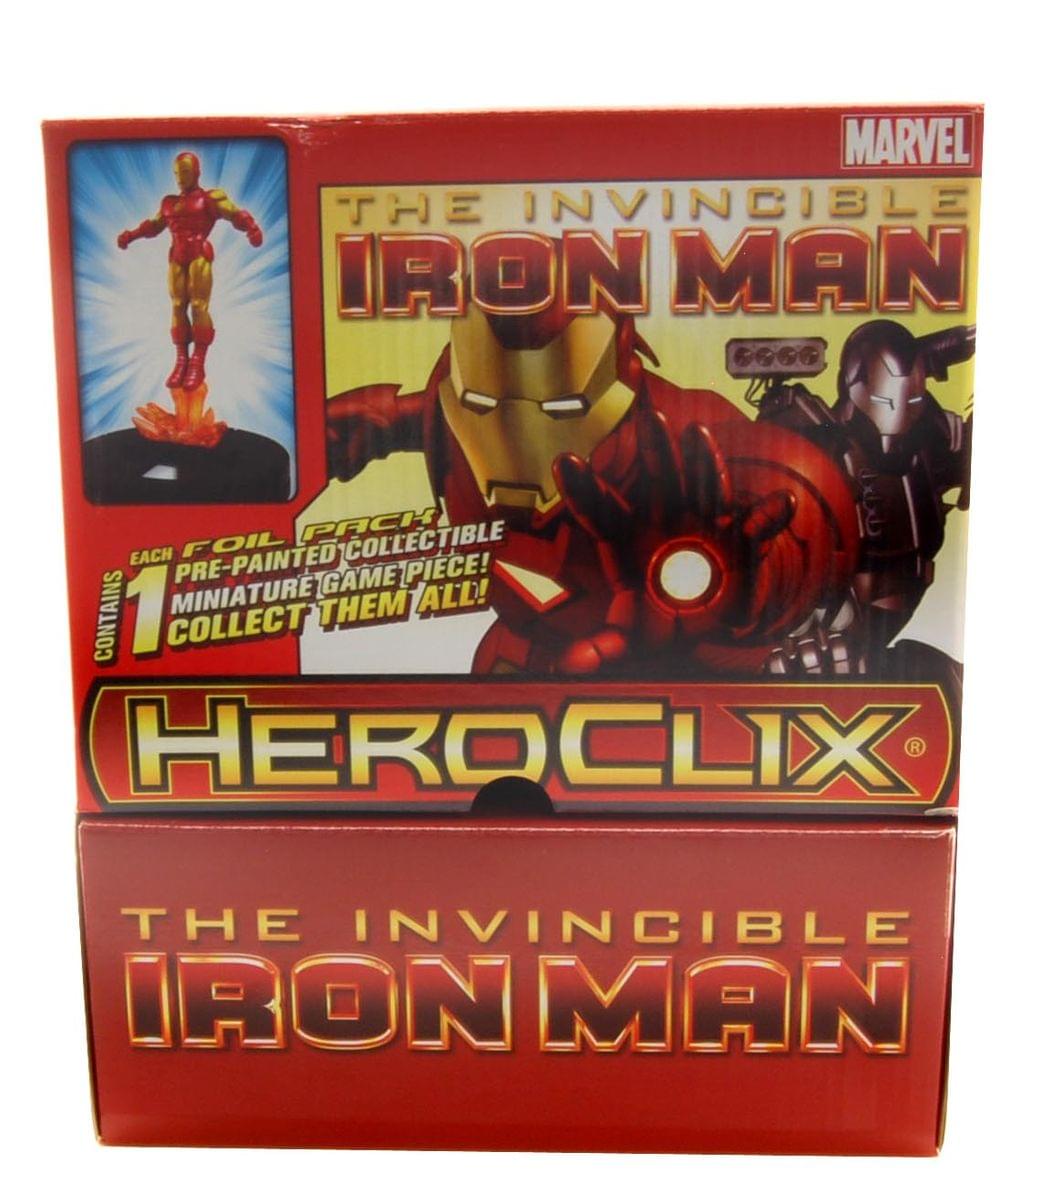 Heroclix Marvel Invincible Iron Man Gravity Feed Case of 24